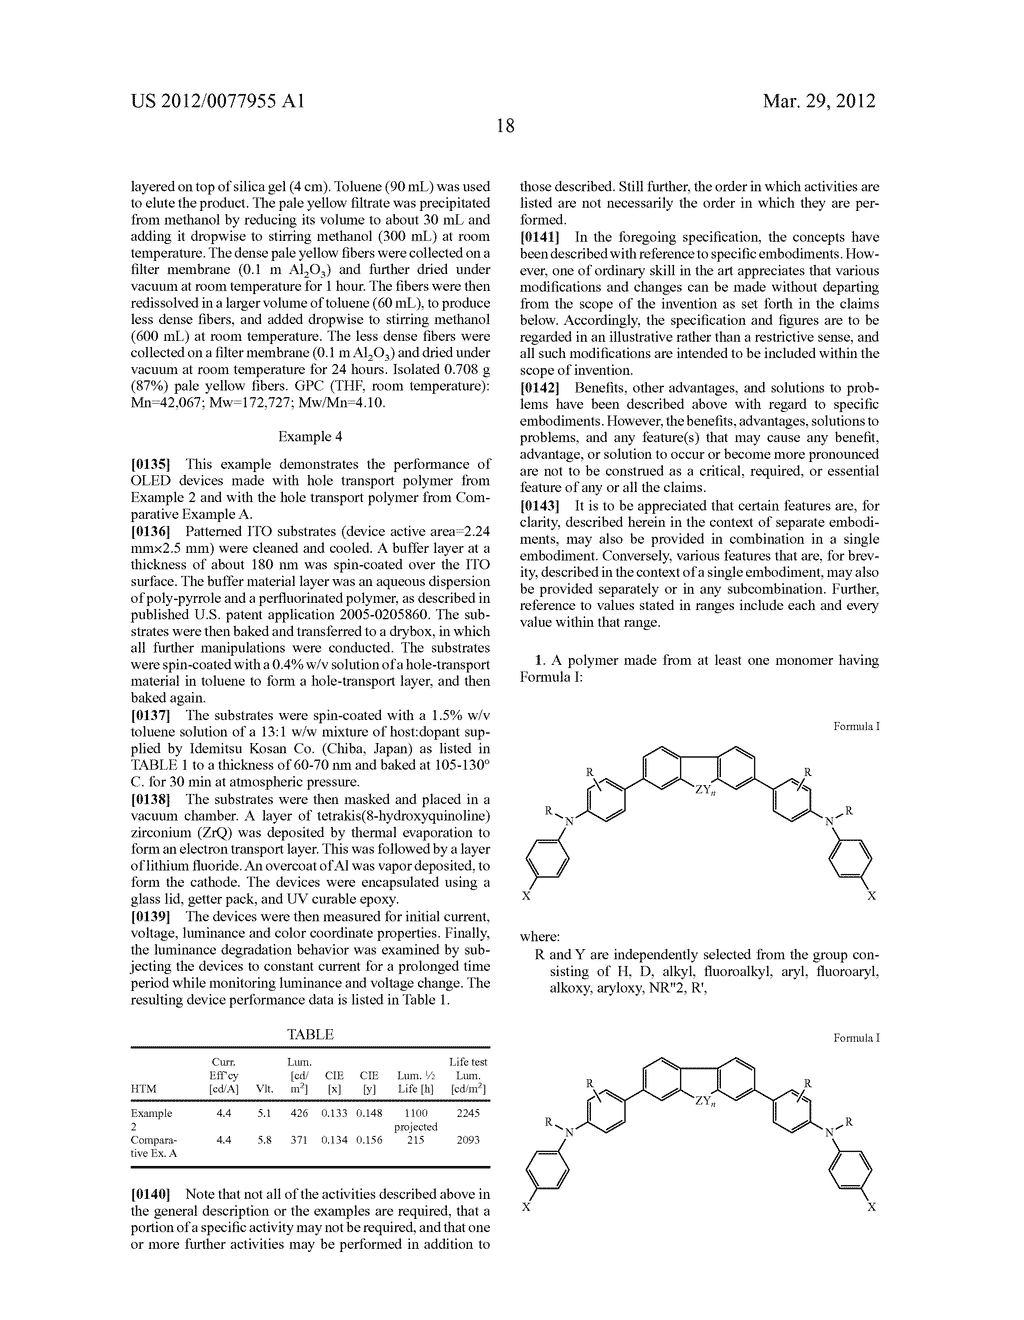 HOLE TRANSPORT POLYMERS - diagram, schematic, and image 20